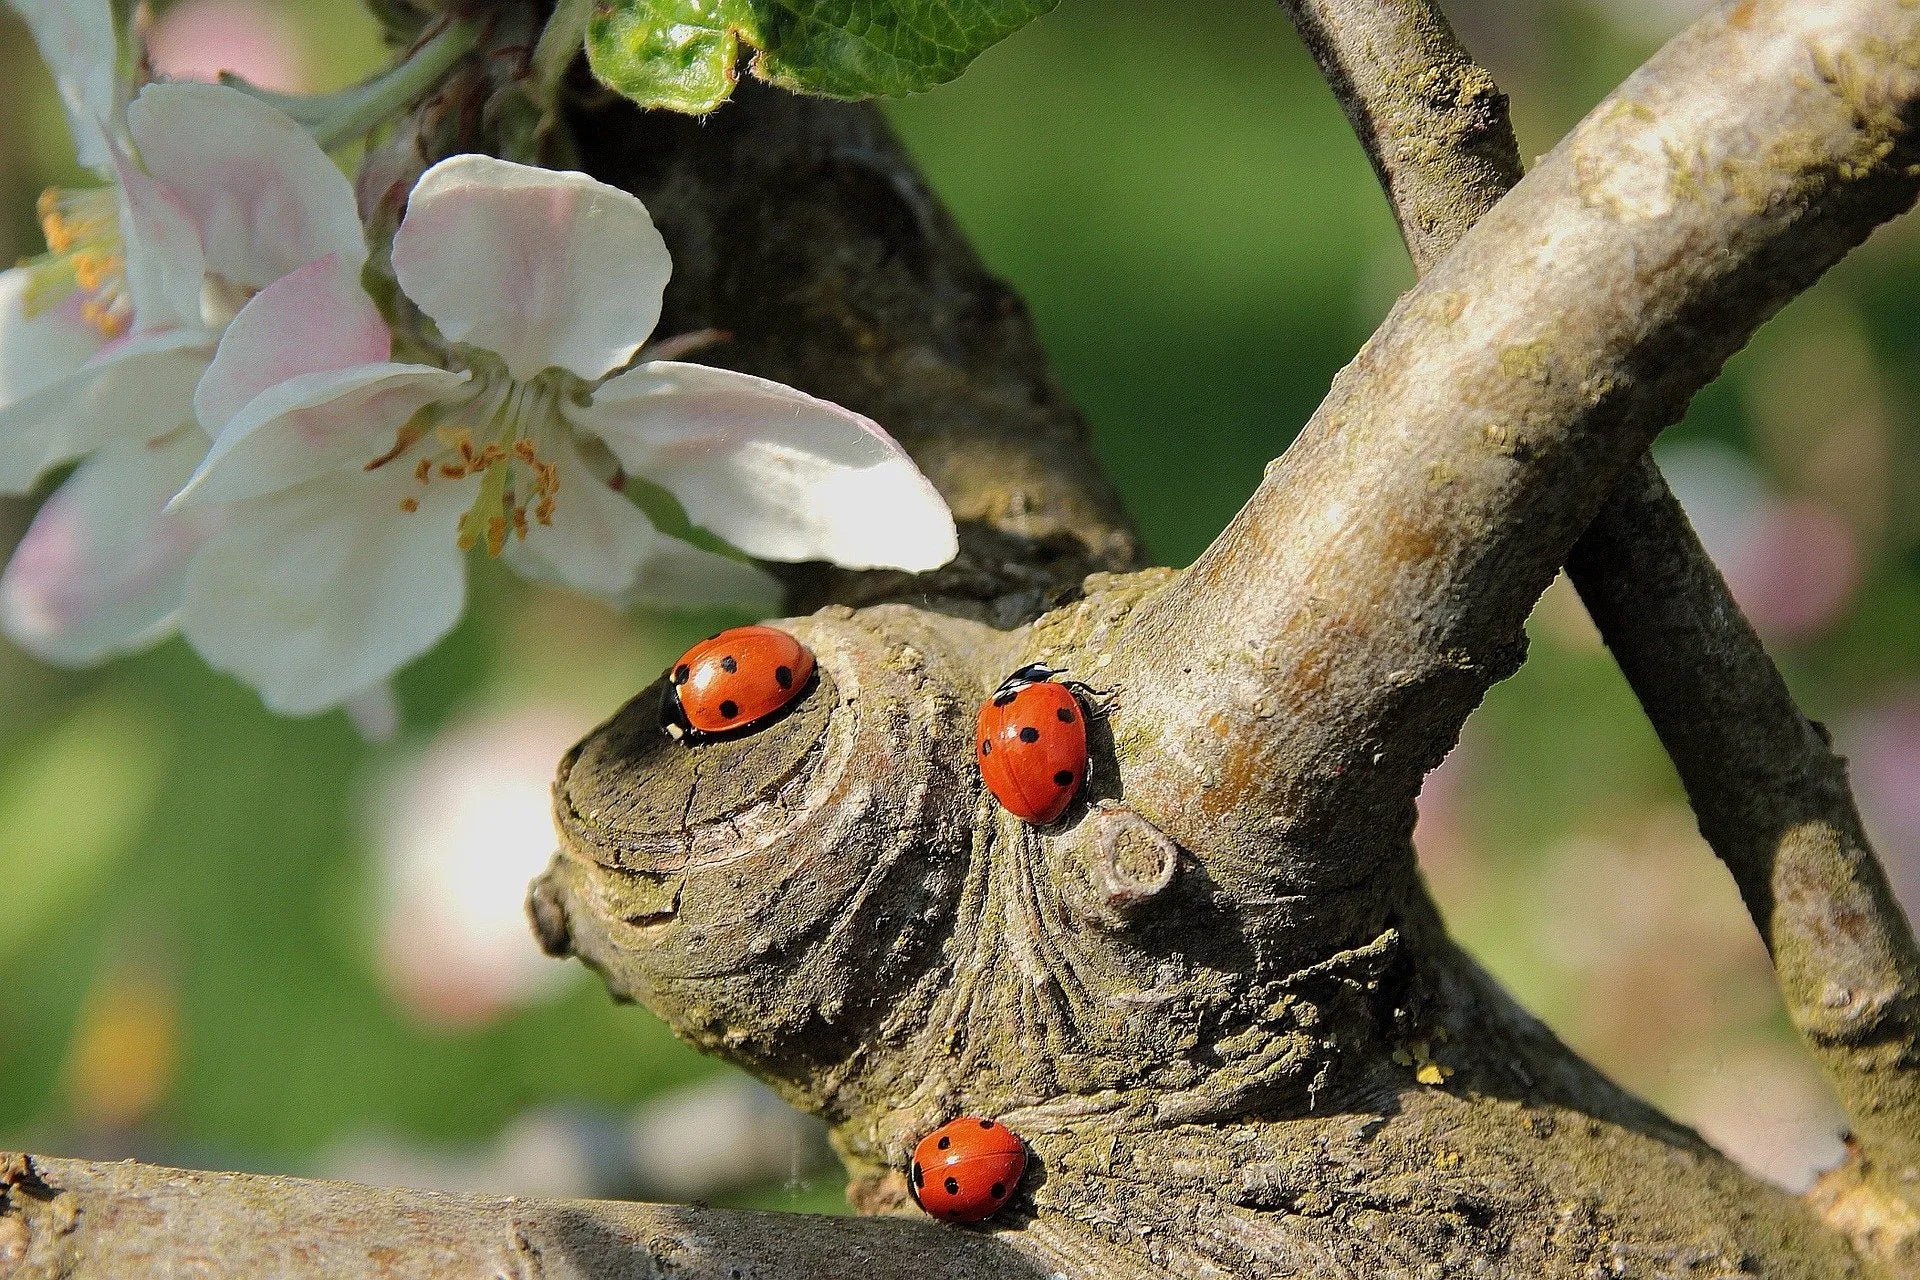 One example of natural pest control, using ladybirds to limit numbers of aphids.